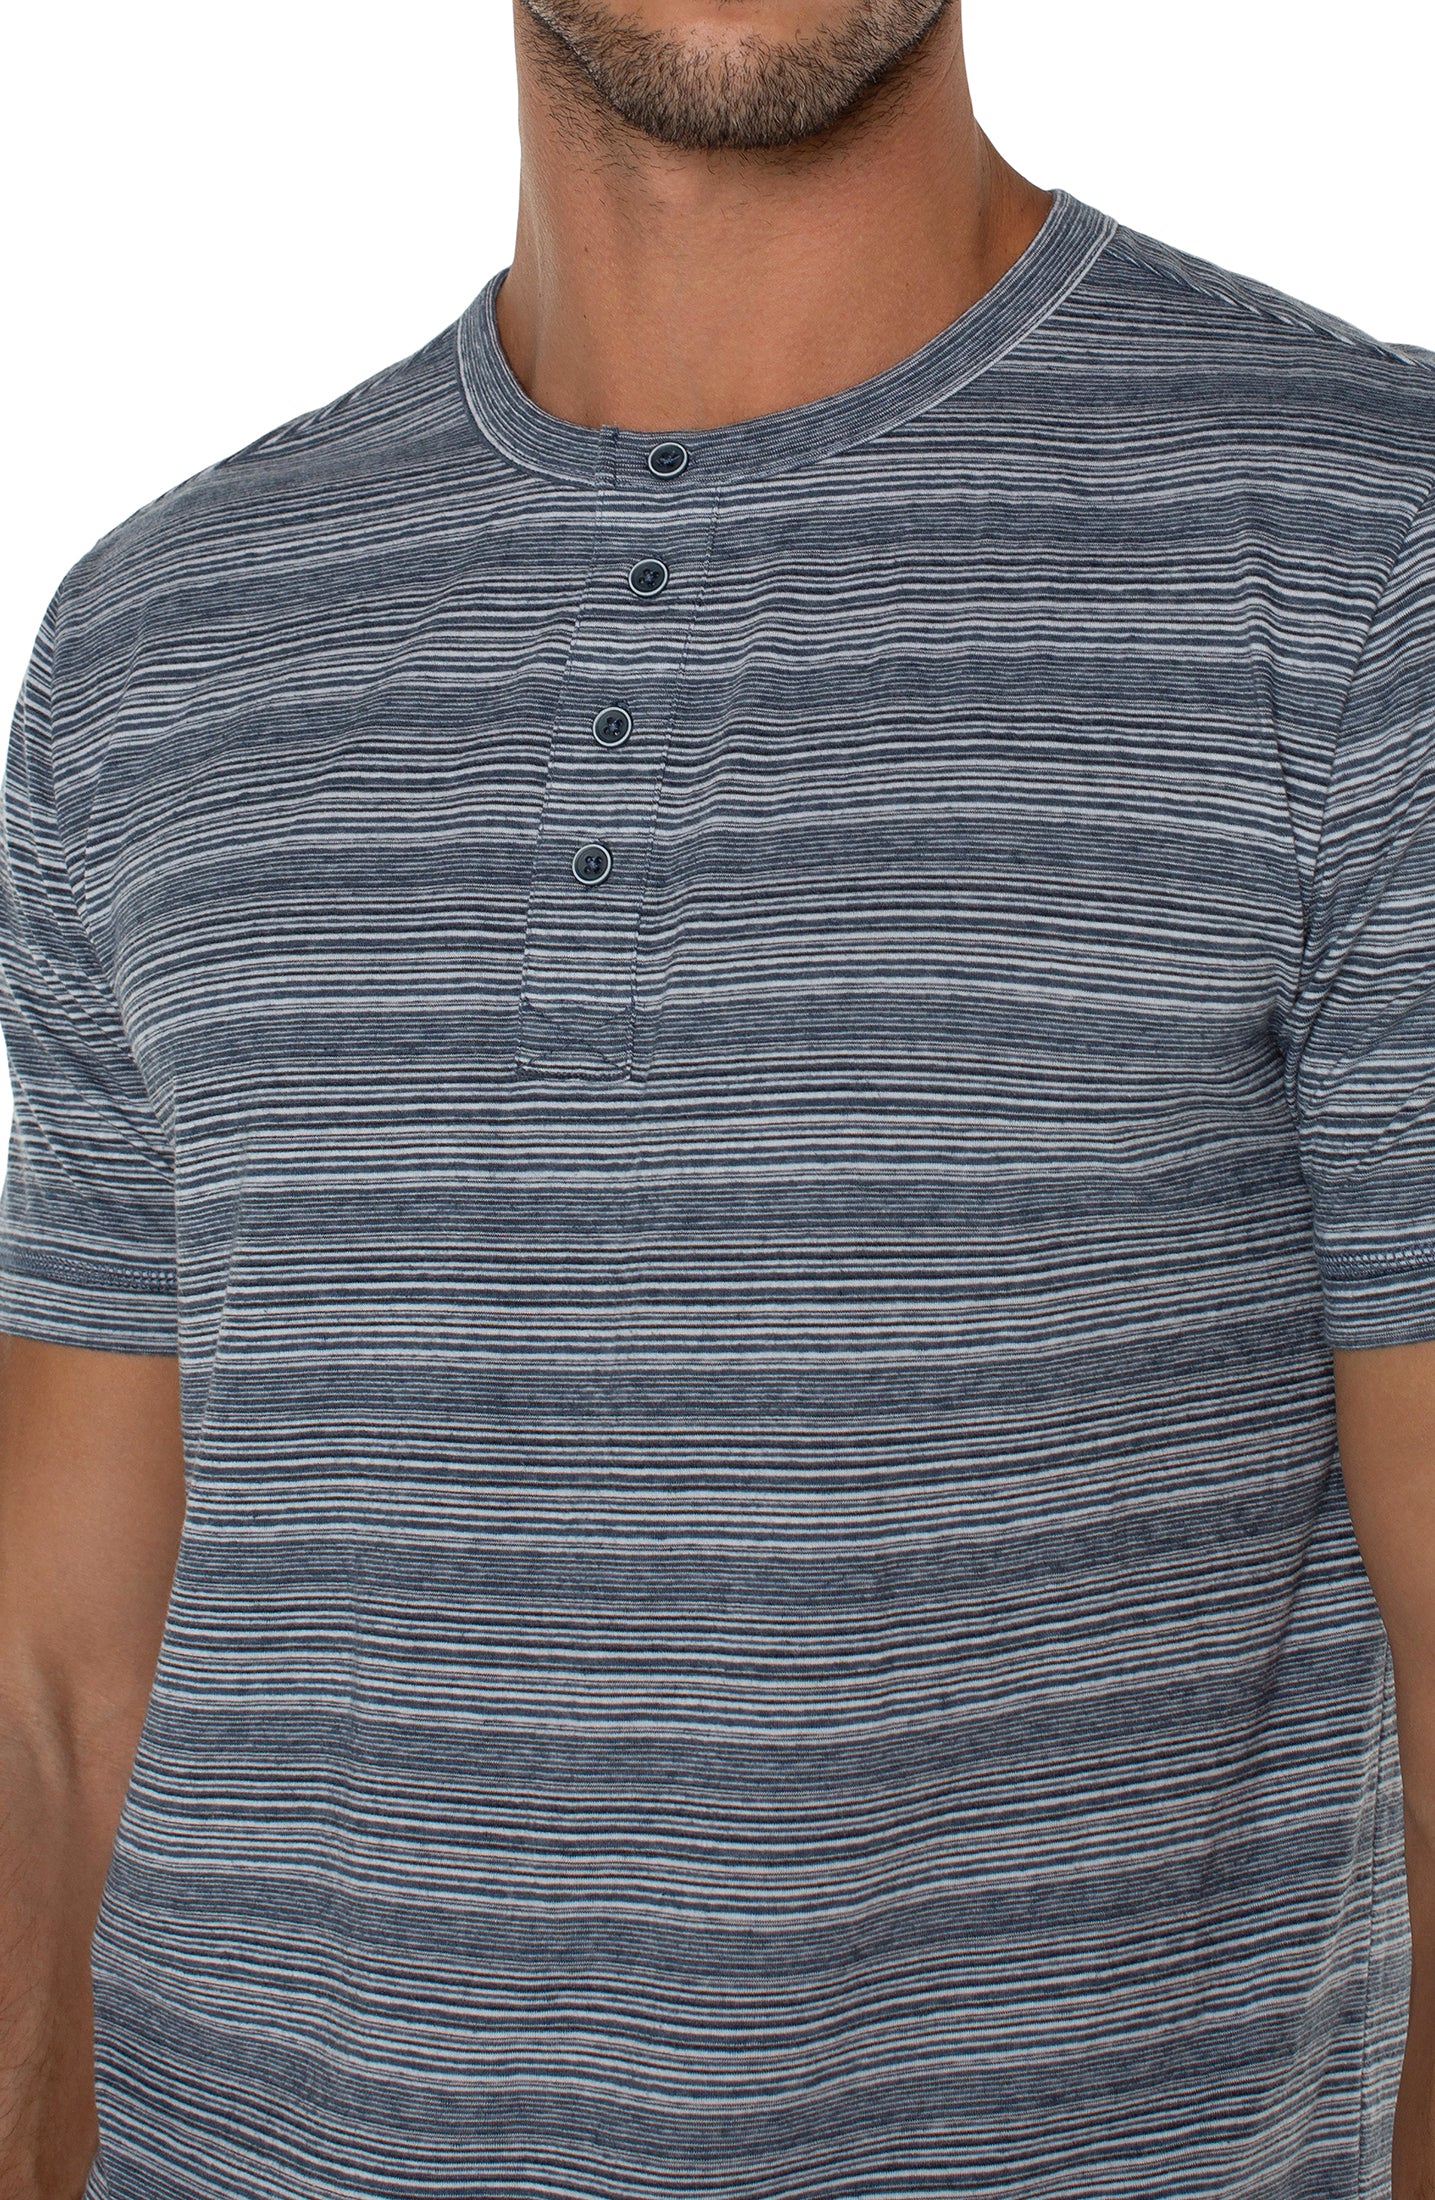 Blue Striped Short Sleeve Henley by Liverpool